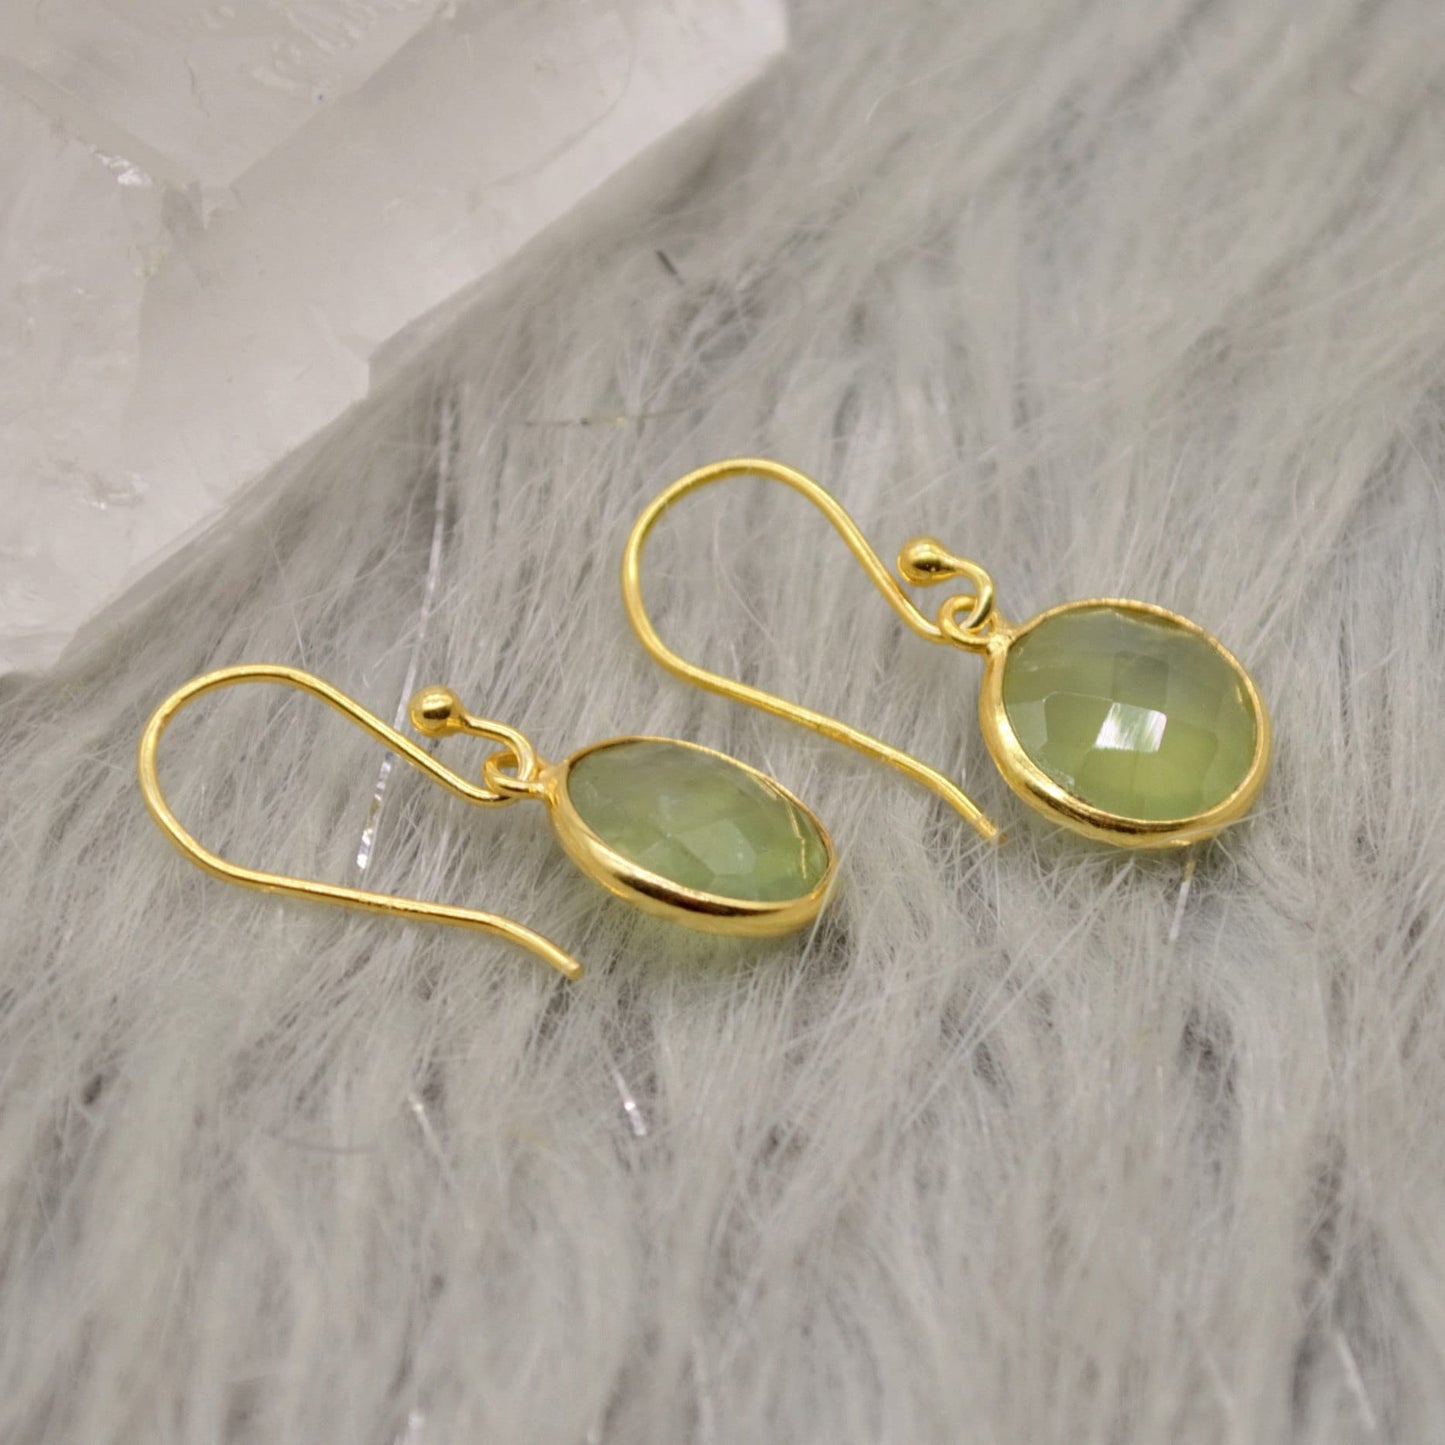 Prehnite Gold Earrings, Gold Plated Sterling Silver Gemstone Earrings, Unique Dangle Drop Earrings, Birthday Gifts For Her, Christmas Gifts